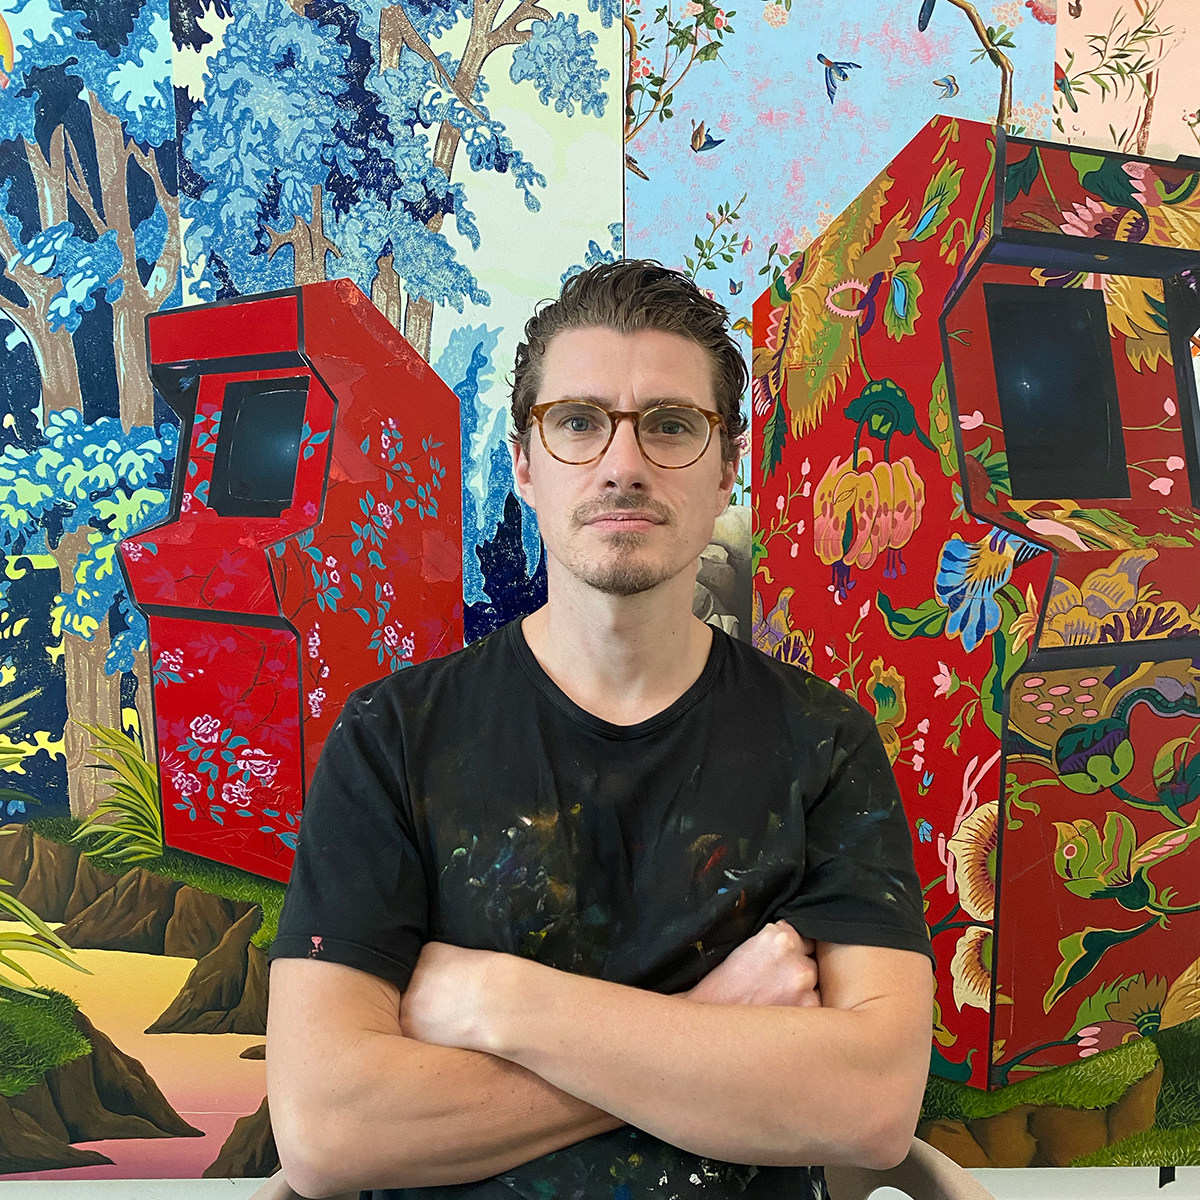 Stephen Thorpe, who recently staged the exhibition “Enter the Forest at the Darkest Point” at Hong Kong gallery Ora-Ora, explains how Gobelin tapestries influenced his practice. Photo: Stephen Thorpe